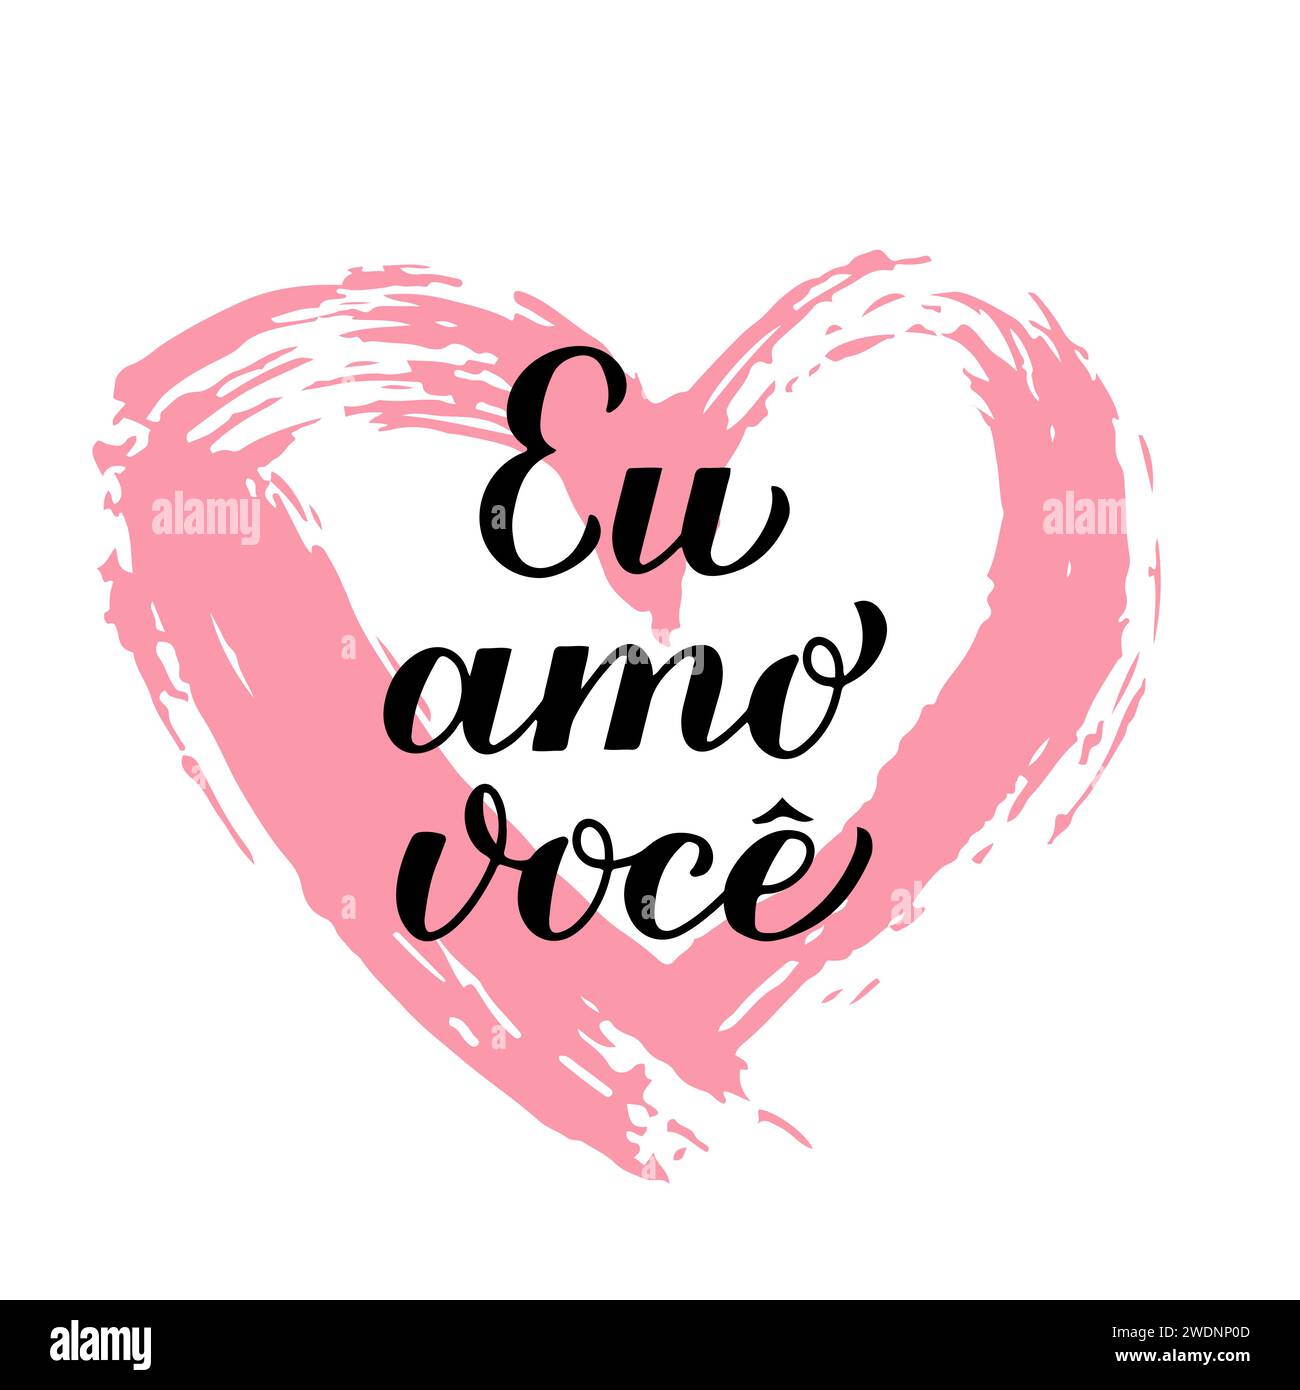 Eu Amo Voce calligraphy hand lettering on grunge heart. I Love You inscription in Brazilian Portuguese. Valentines day card. Vector template for banne Stock Vector